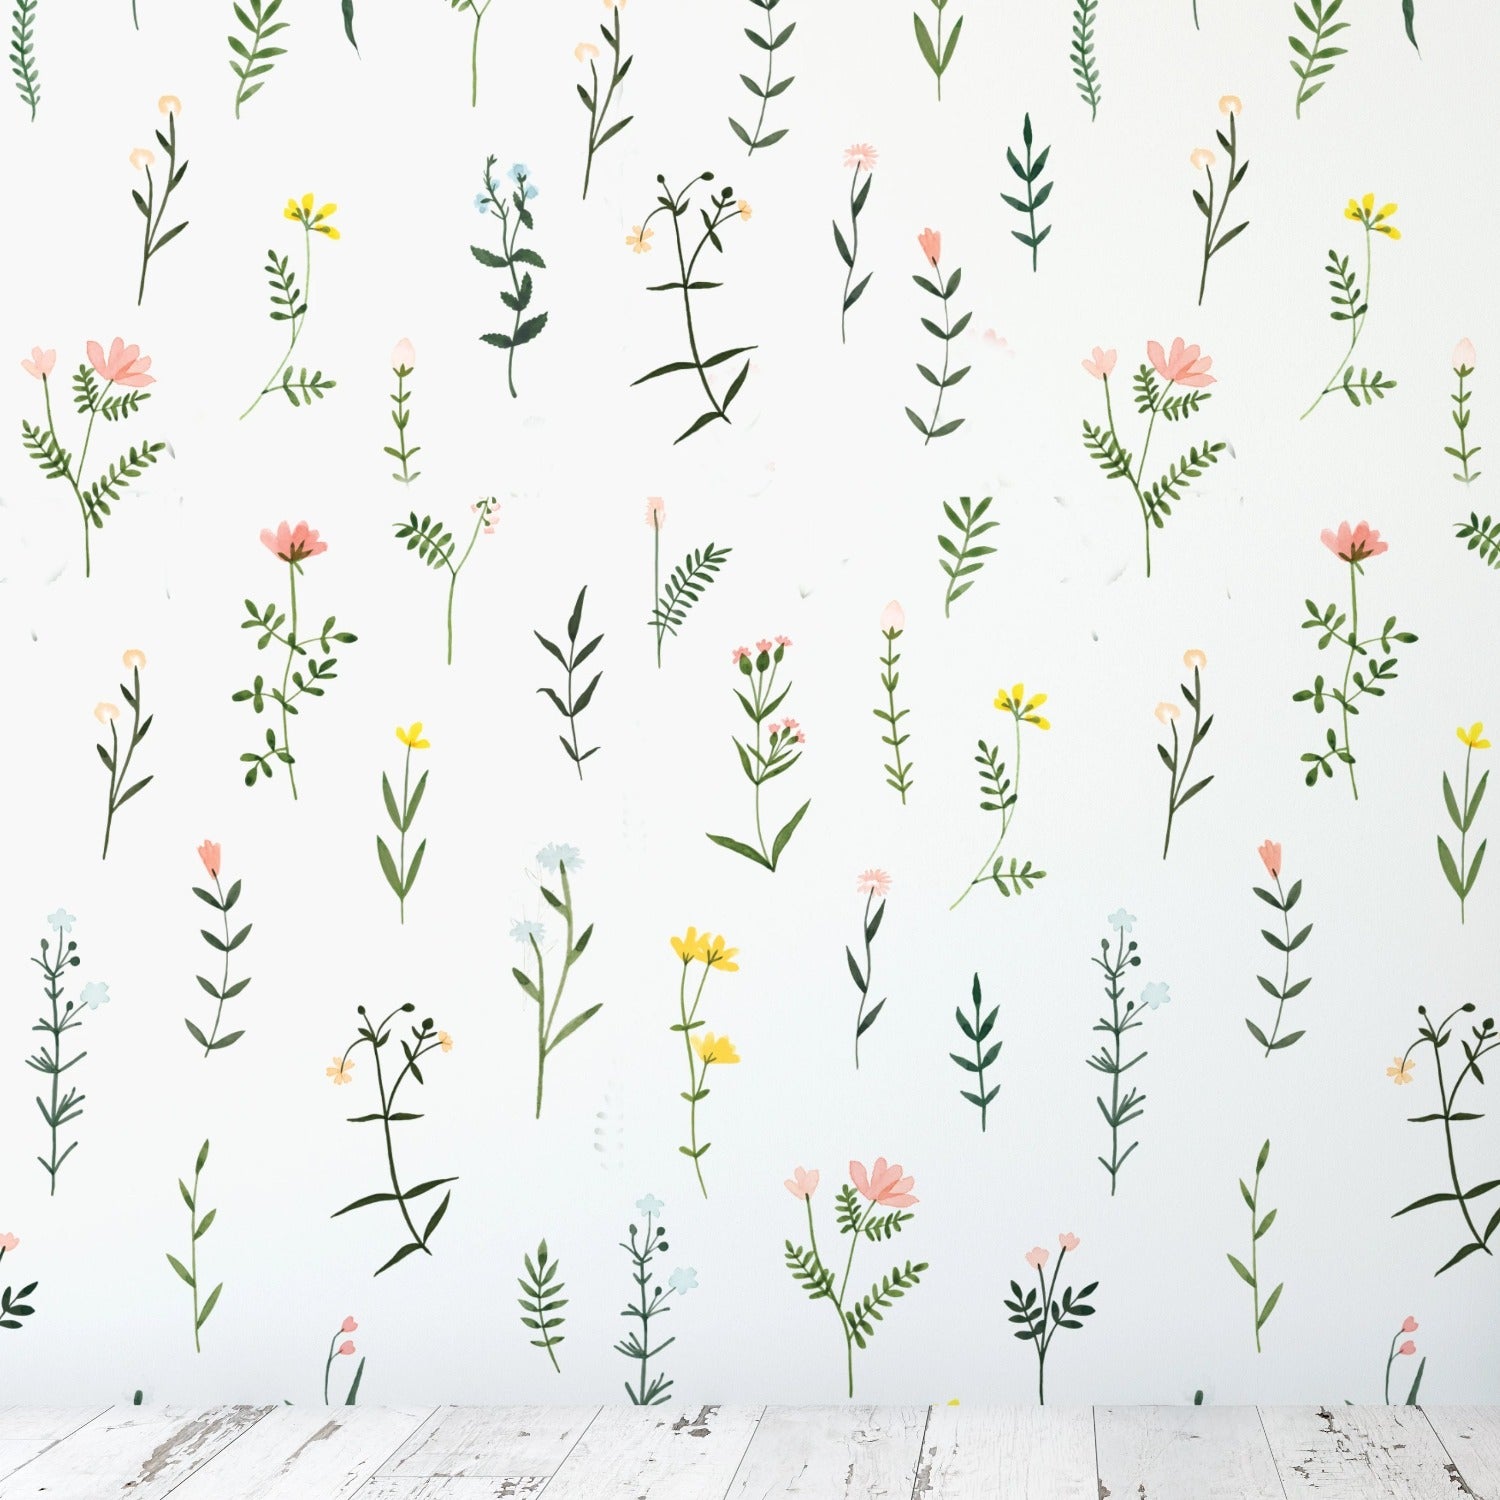 A wall covered with 'Floral Wallpaper - XII', showcasing an array of delicate flowers and greenery. The pattern is evenly spaced, creating a sense of a wildflower meadow brought indoors. The colors are gentle, with pastel pinks, yellows, and greens that add a playful yet elegant touch to the room.